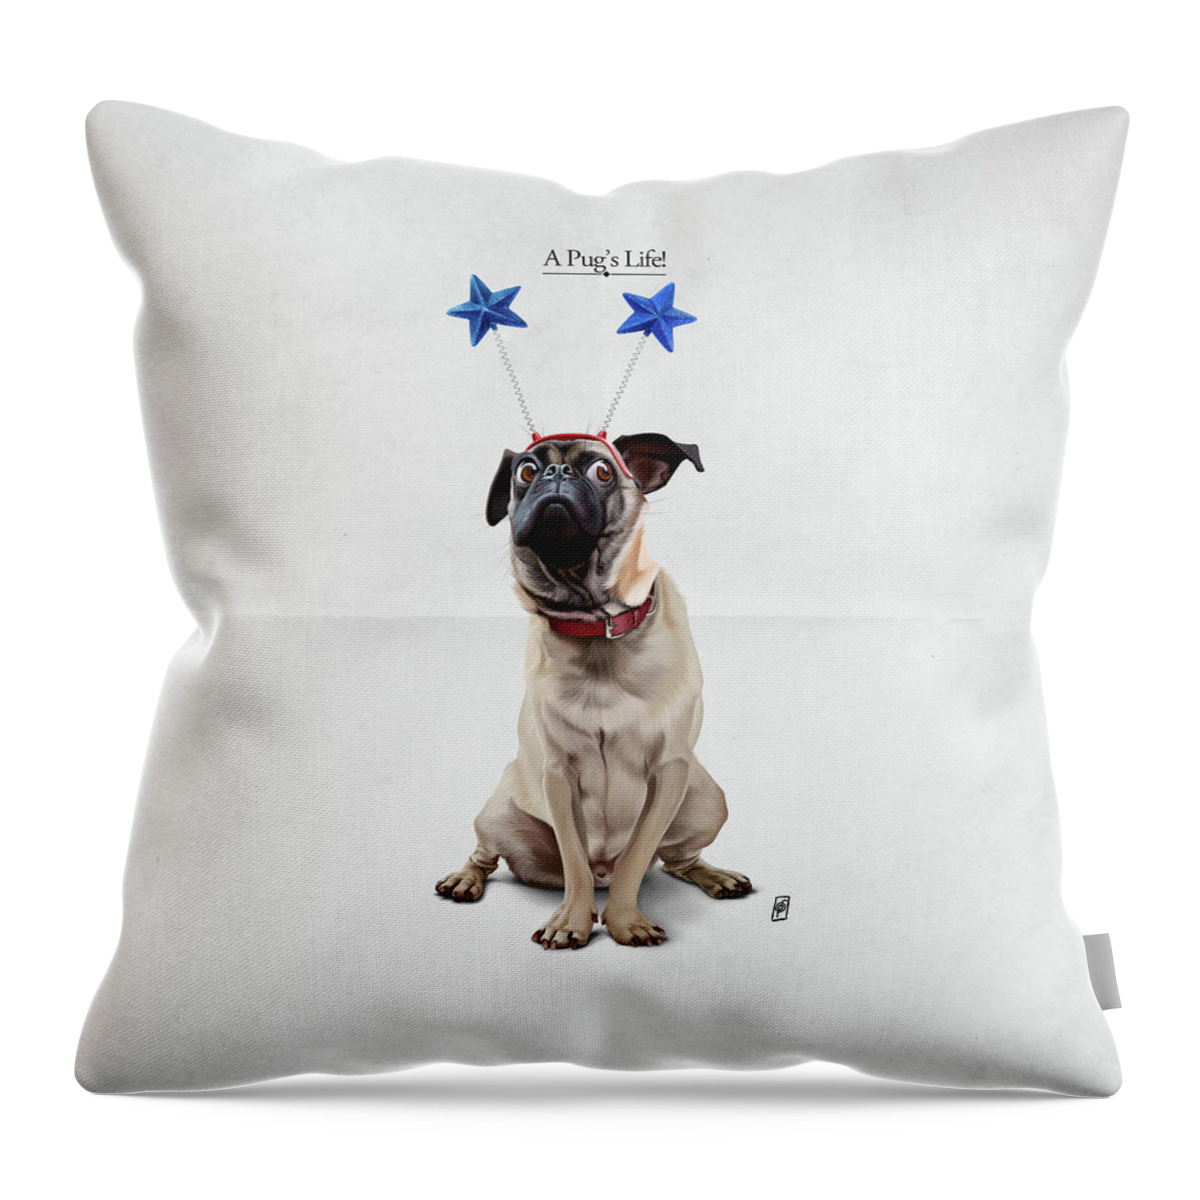 Illustration Throw Pillow featuring the digital art A Pug's Life by Rob Snow